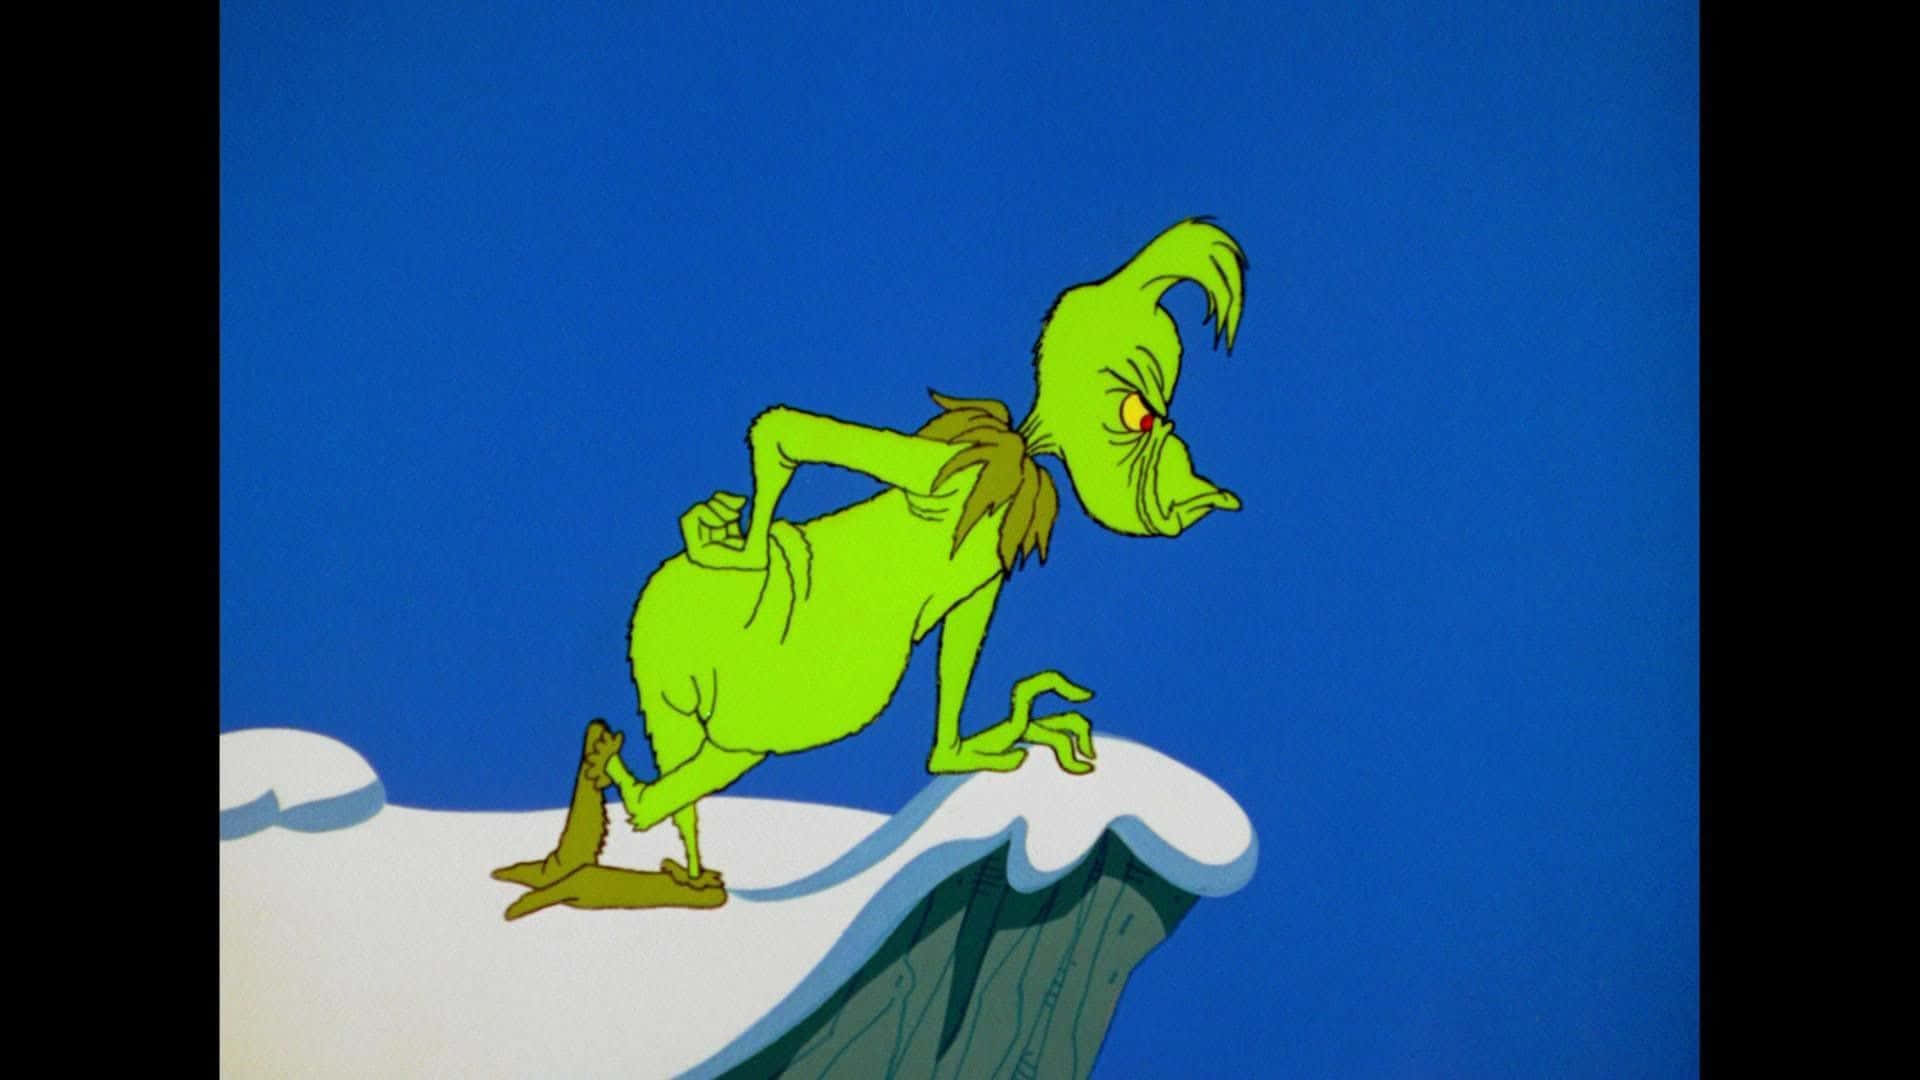 The Grinch In The Snow Wallpaper